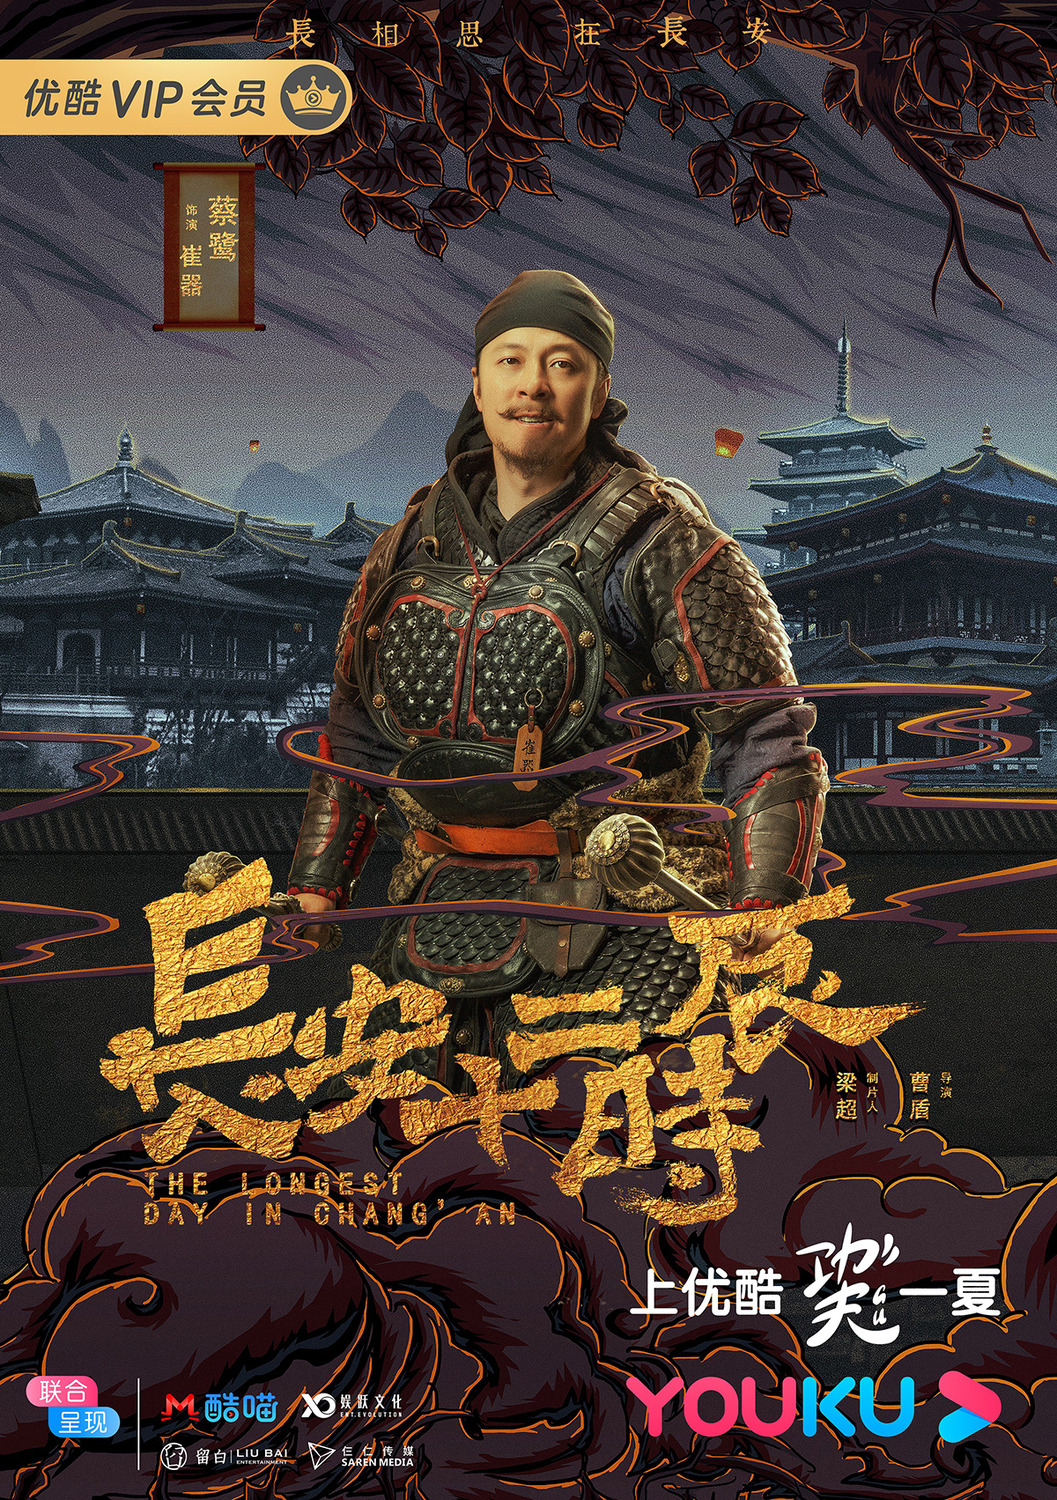 Extra Large TV Poster Image for Chang'an shi er shi chen (#4 of 18)